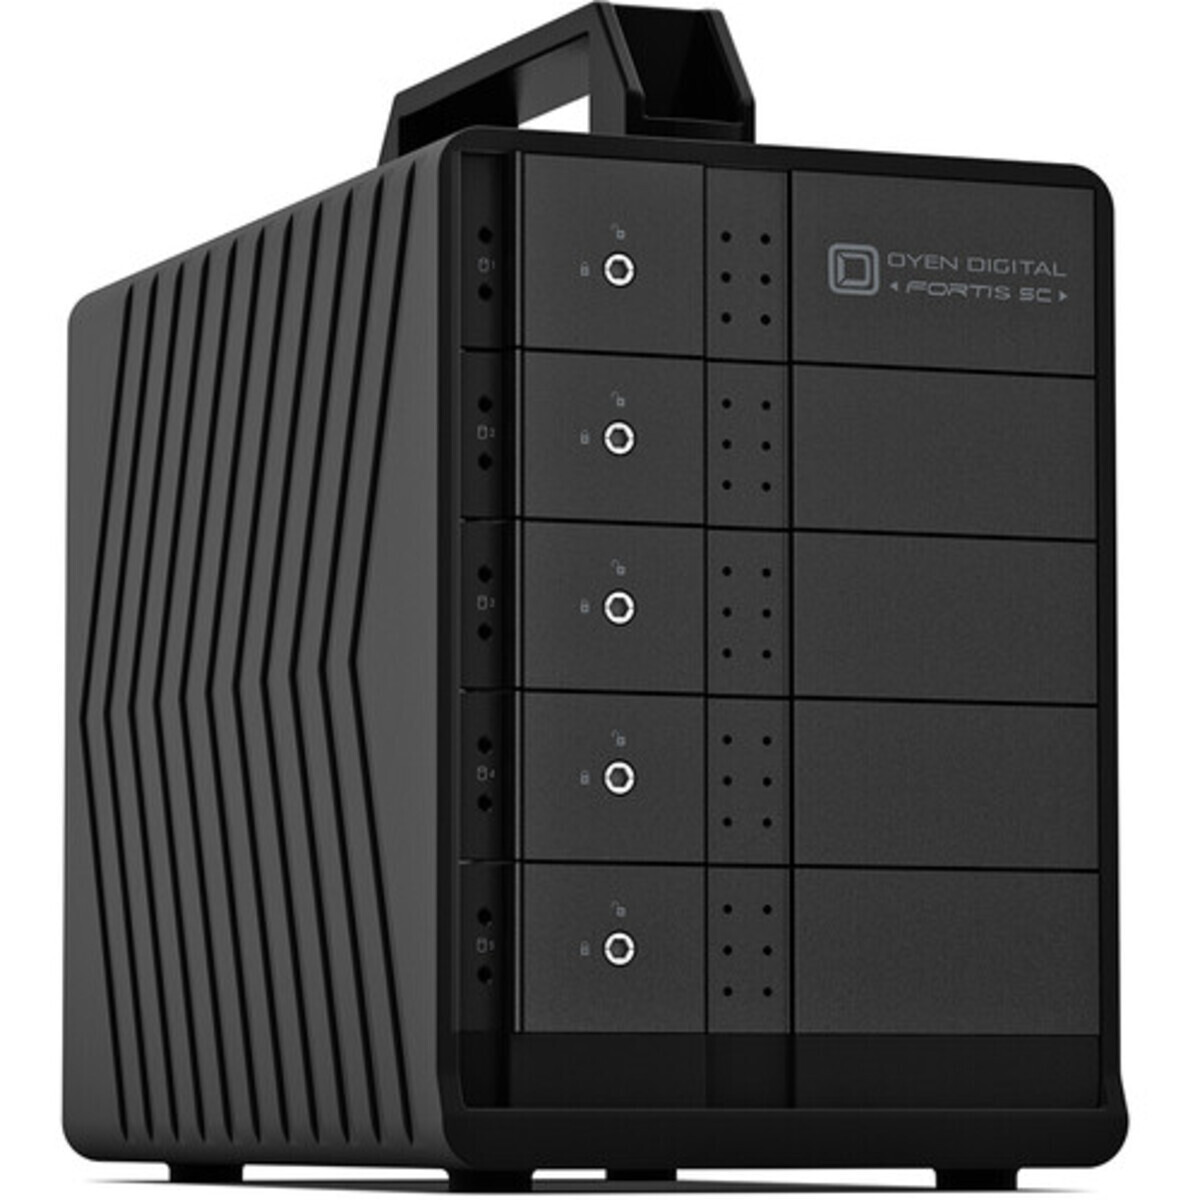 OYEN Fortis 5C 5tb 5-Bay Desktop Multimedia / Power User / Business DAS - Direct Attached Storage Device 5x1tb Sandisk Ultra 3D SDSSDH3-1T00 2.5 560/520MB/s SATA 6Gb/s SSD CONSUMER Class Drives Installed - Burn-In Tested Fortis 5C